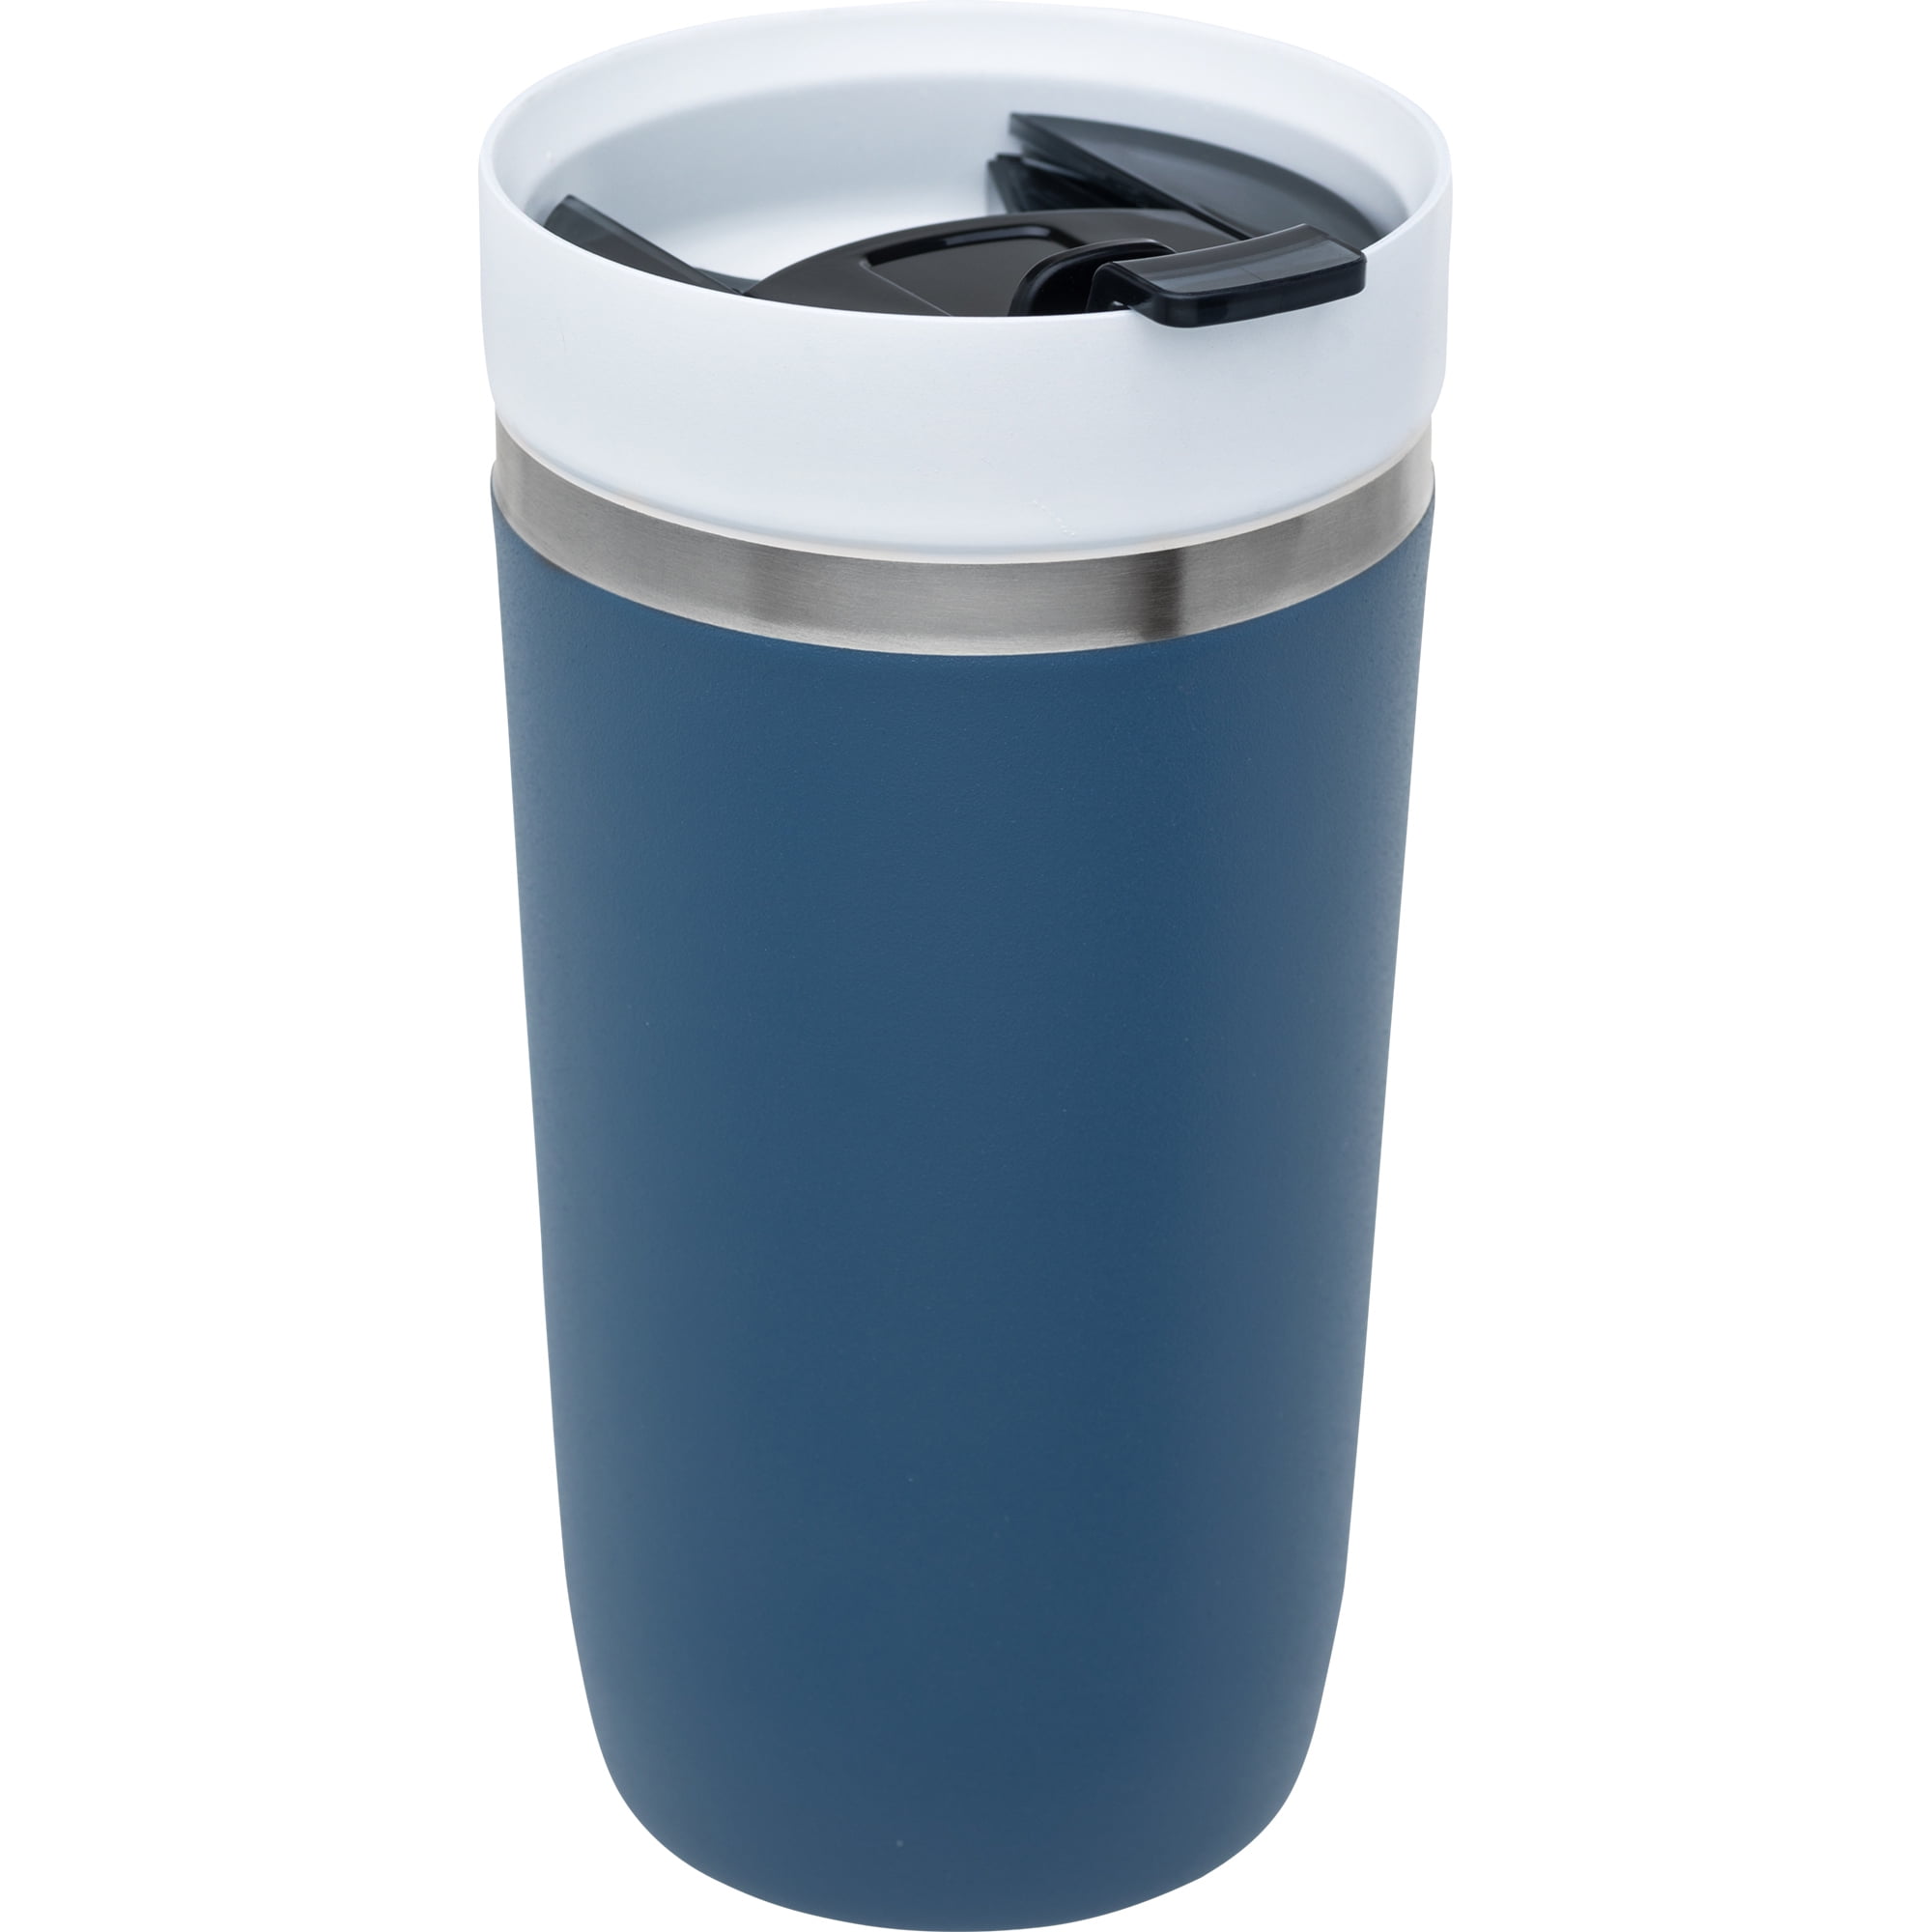 Stanley 16 Oz. Navy Stainless Steel Insulated Tumbler - Farr's Hardware